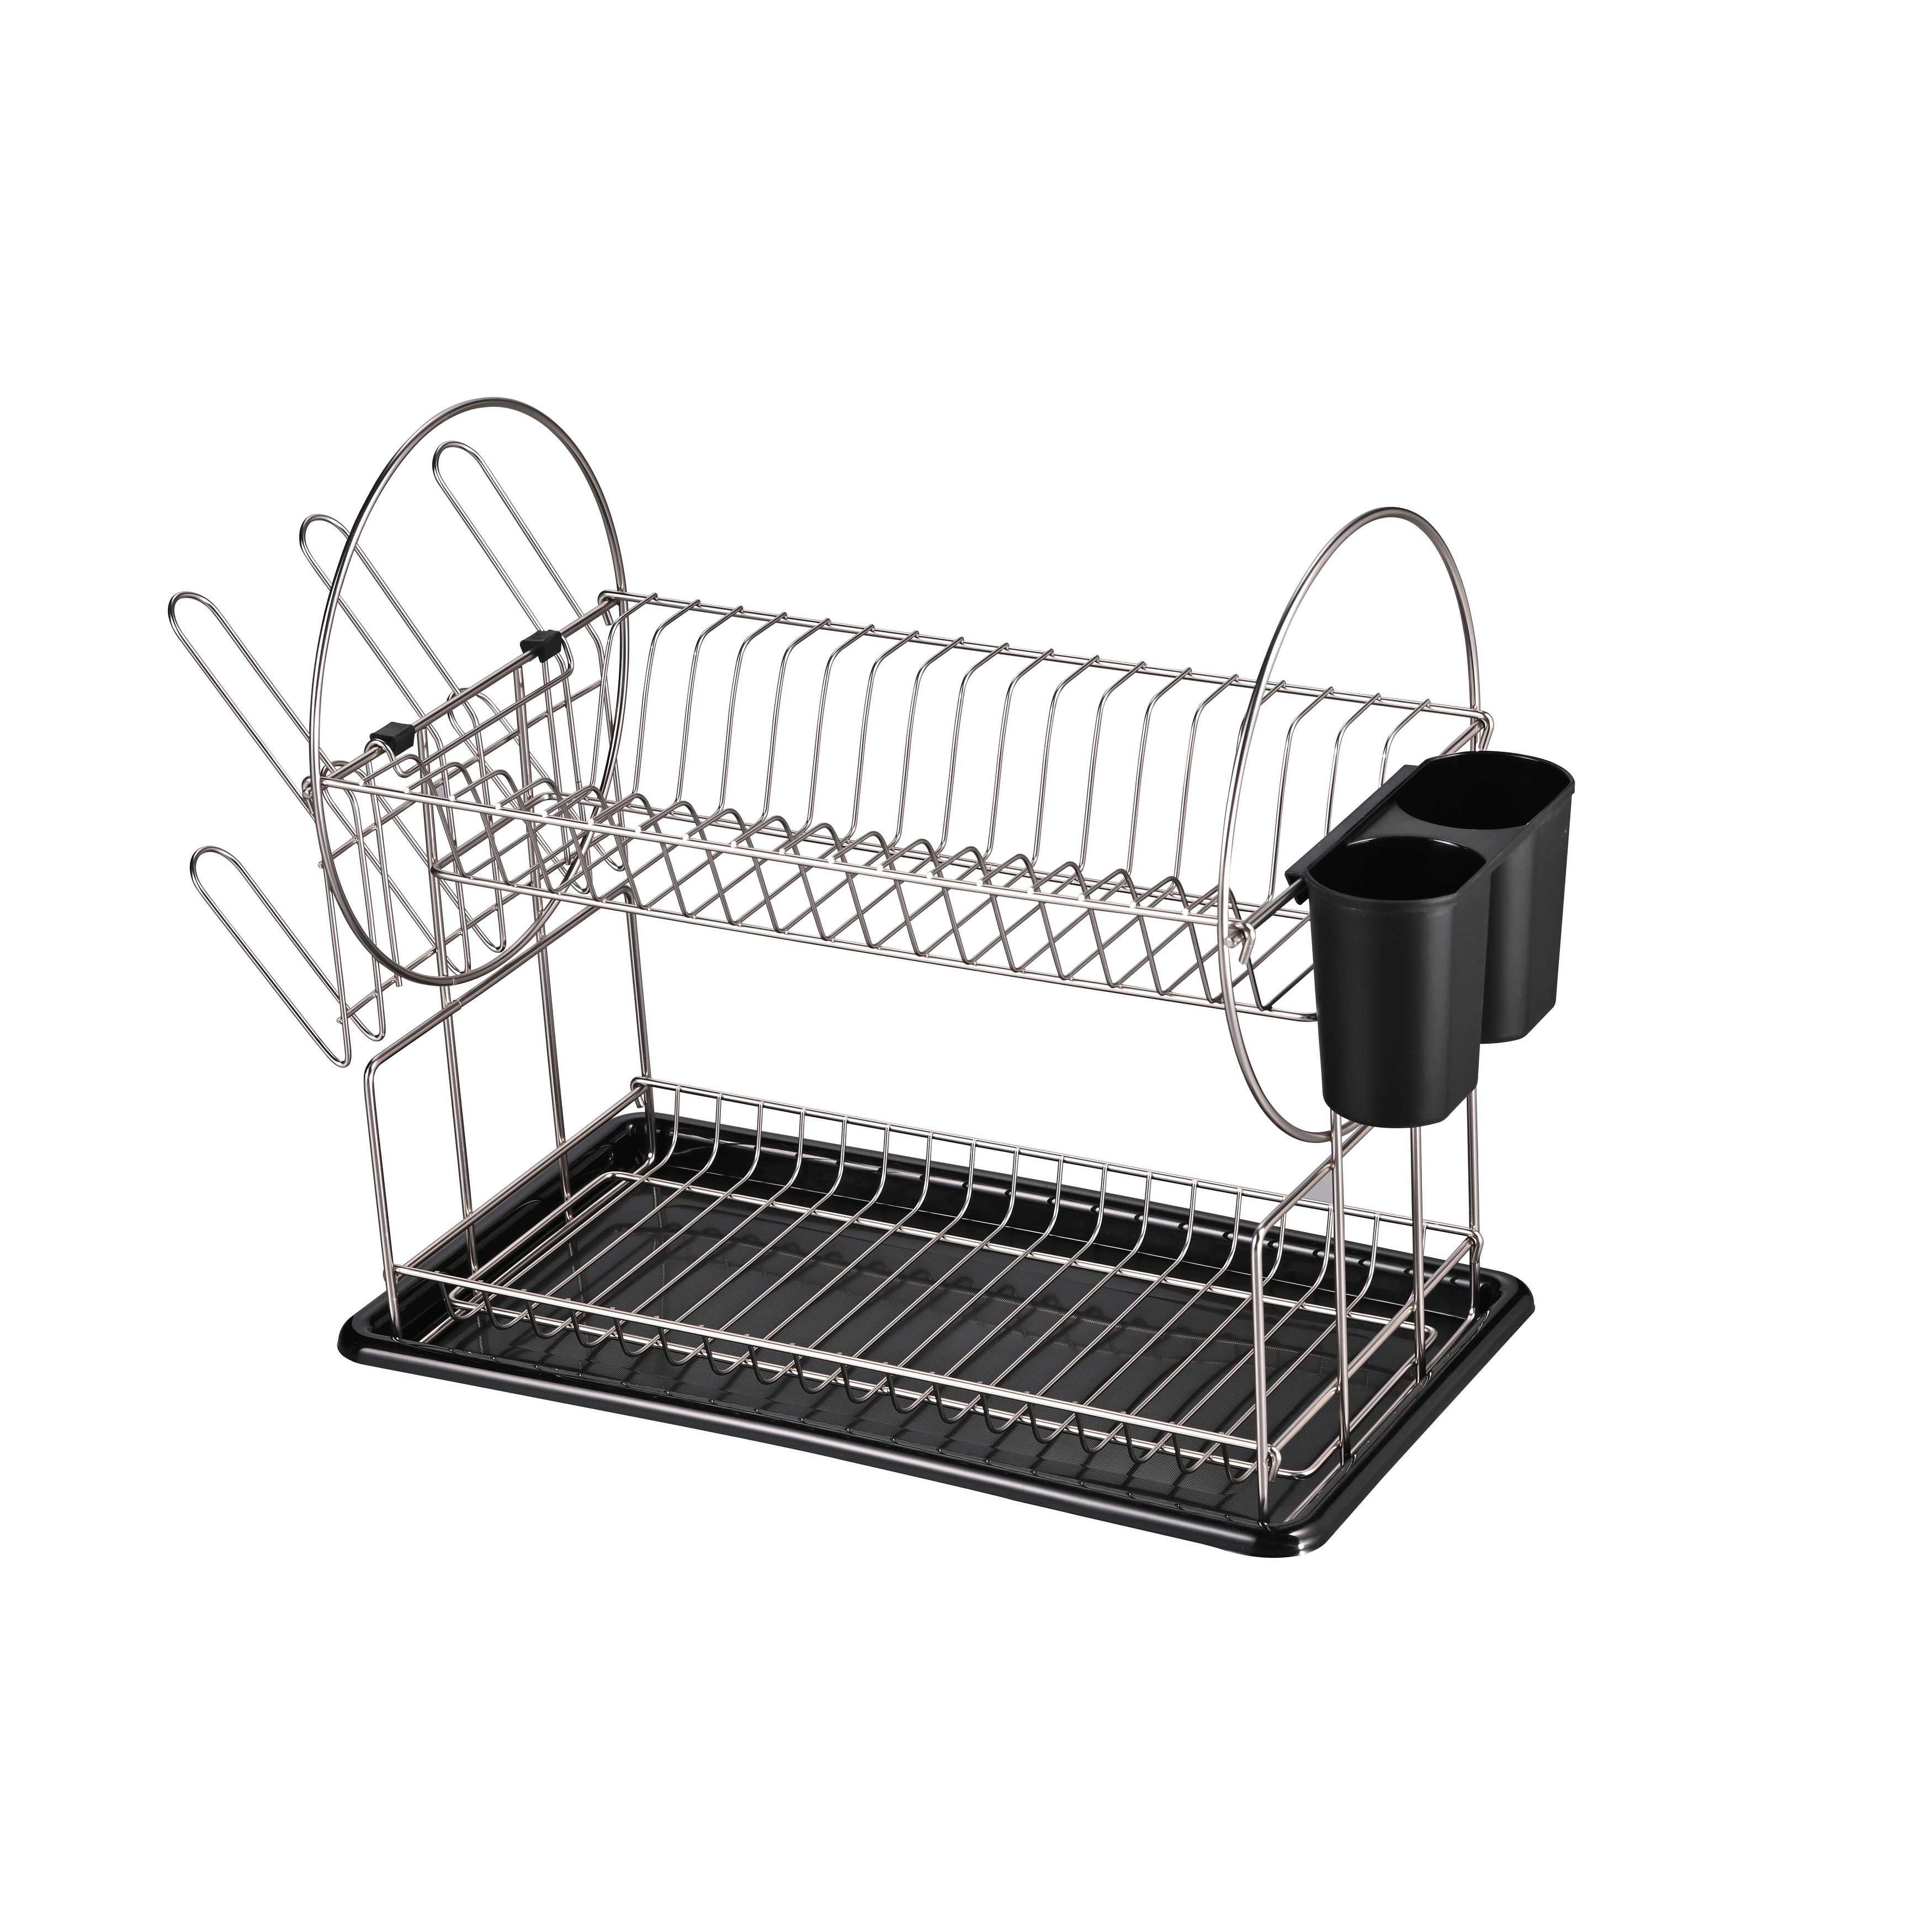 https://ak1.ostkcdn.com/images/products/is/images/direct/72df834f9060711d631570b7324bbacb7a159409/Jiallo-Stainless-Steel-2-Tier-dish-rack-with-dripping-tray-%28Silver%29.jpg